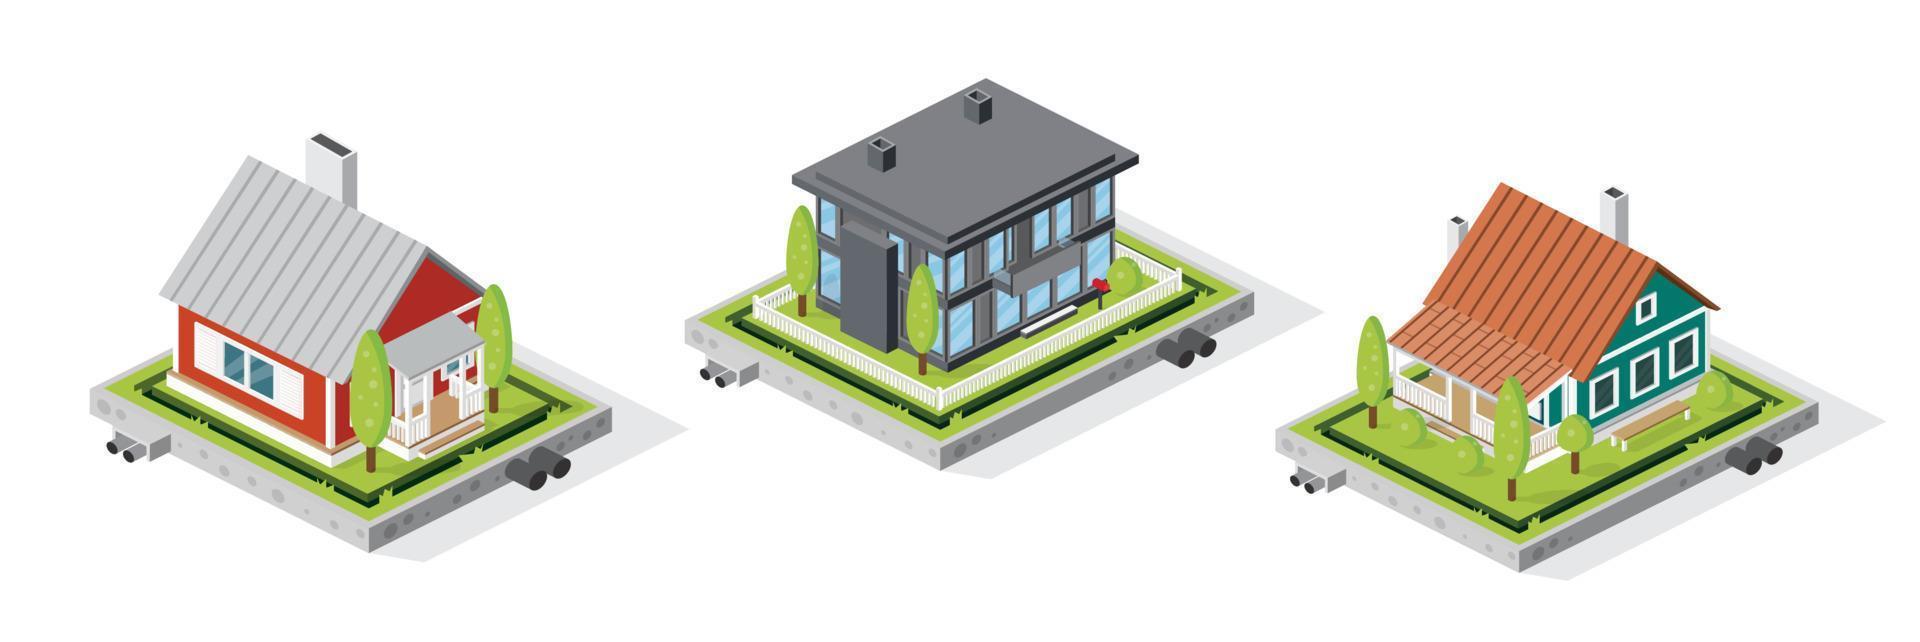 Residential House Buildings Set Isolated on White. Isometric Concept. vector